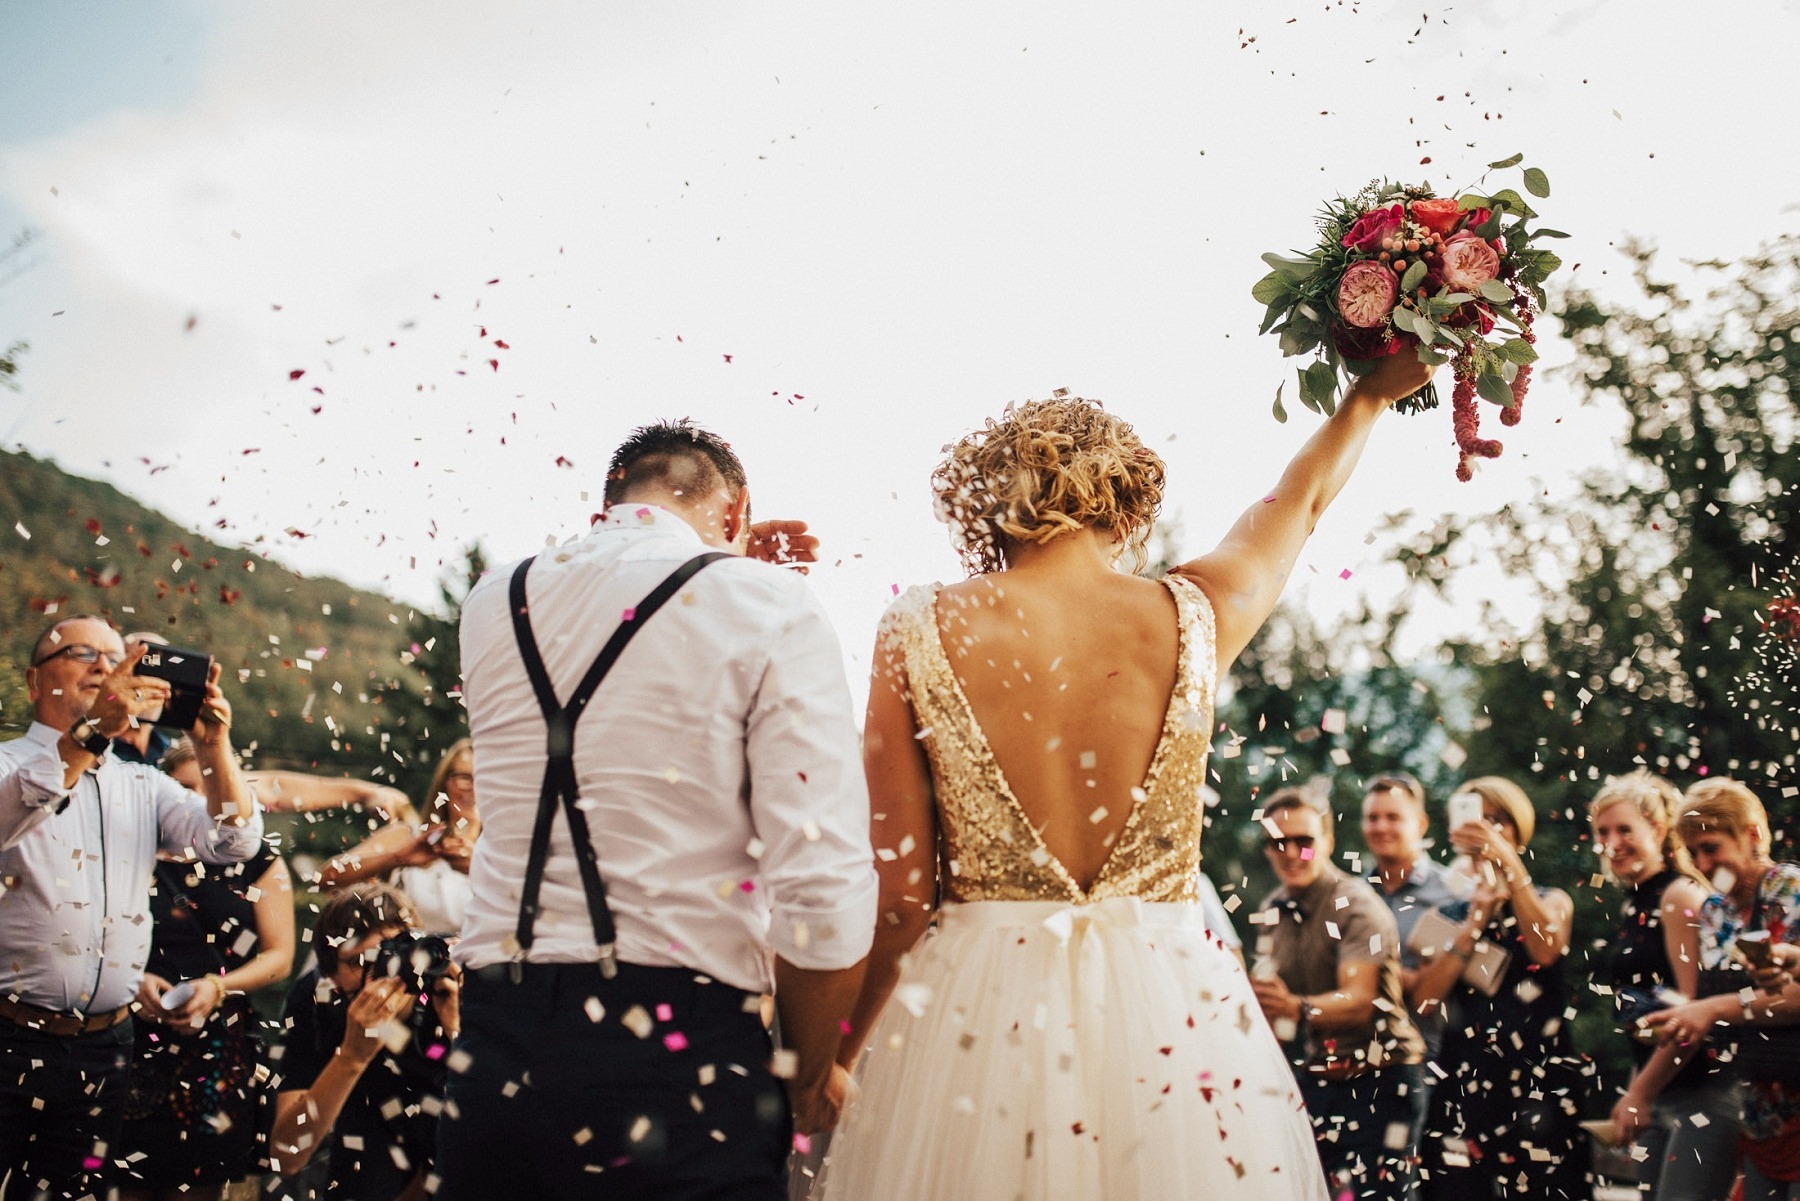 Amazing Canadian wedding traditions you need to know